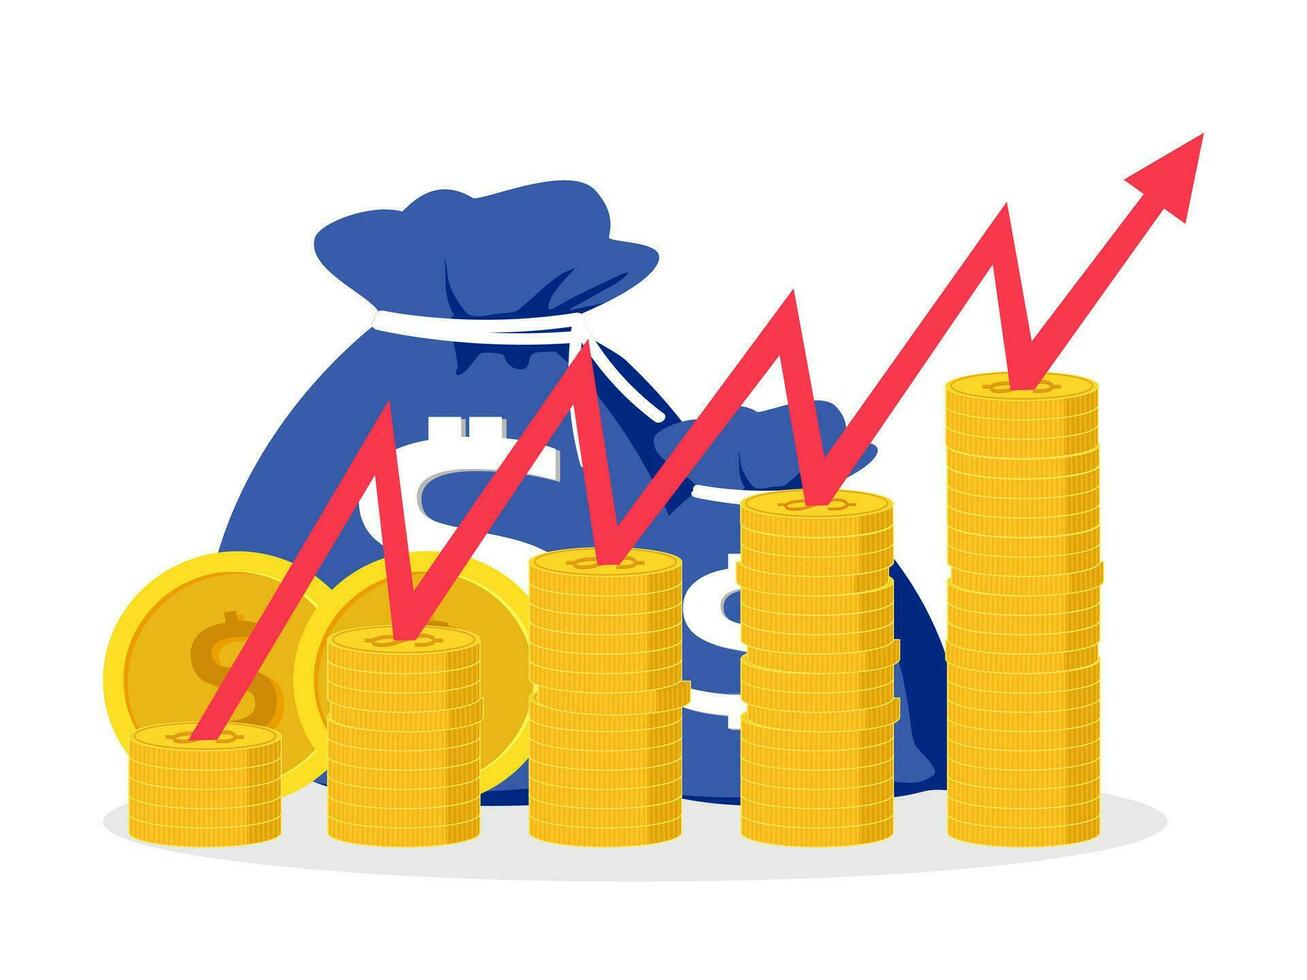 Stack of coins and money bags and arrows to grow. Business concept vector